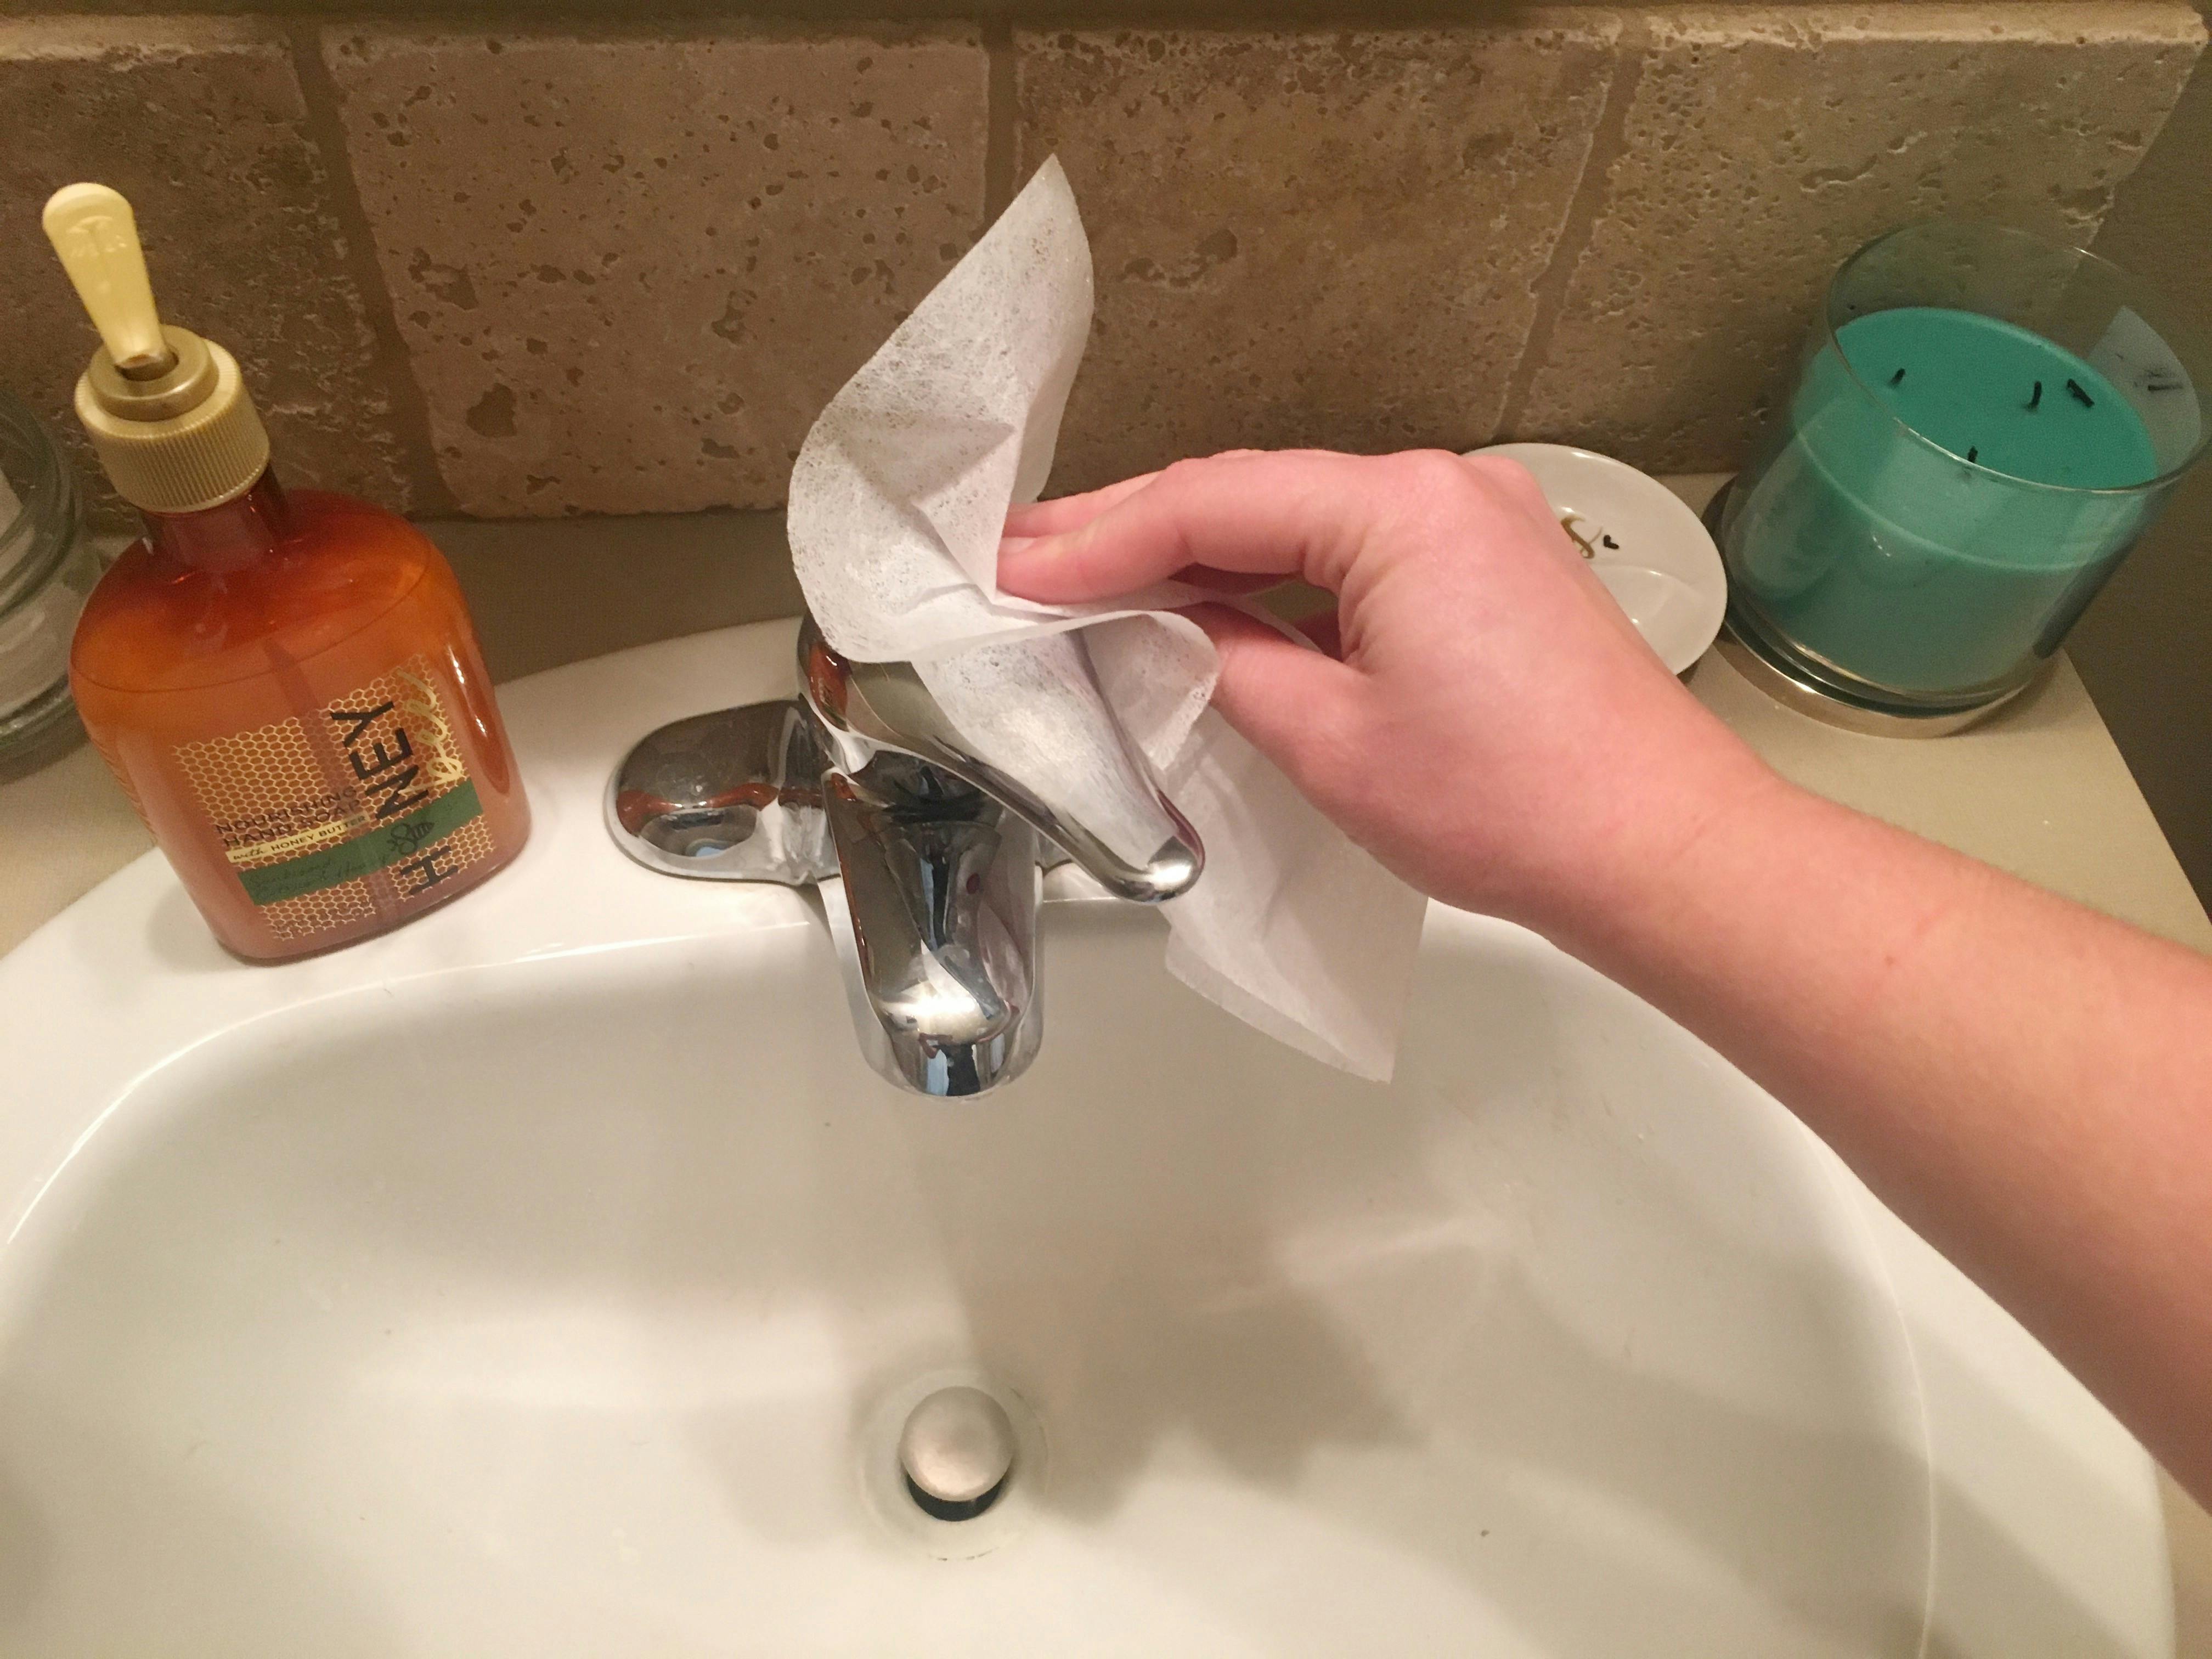 35 Dryer Sheet Hacks Thatll Blow Your Mind The Krazy Coupon Lady 1237